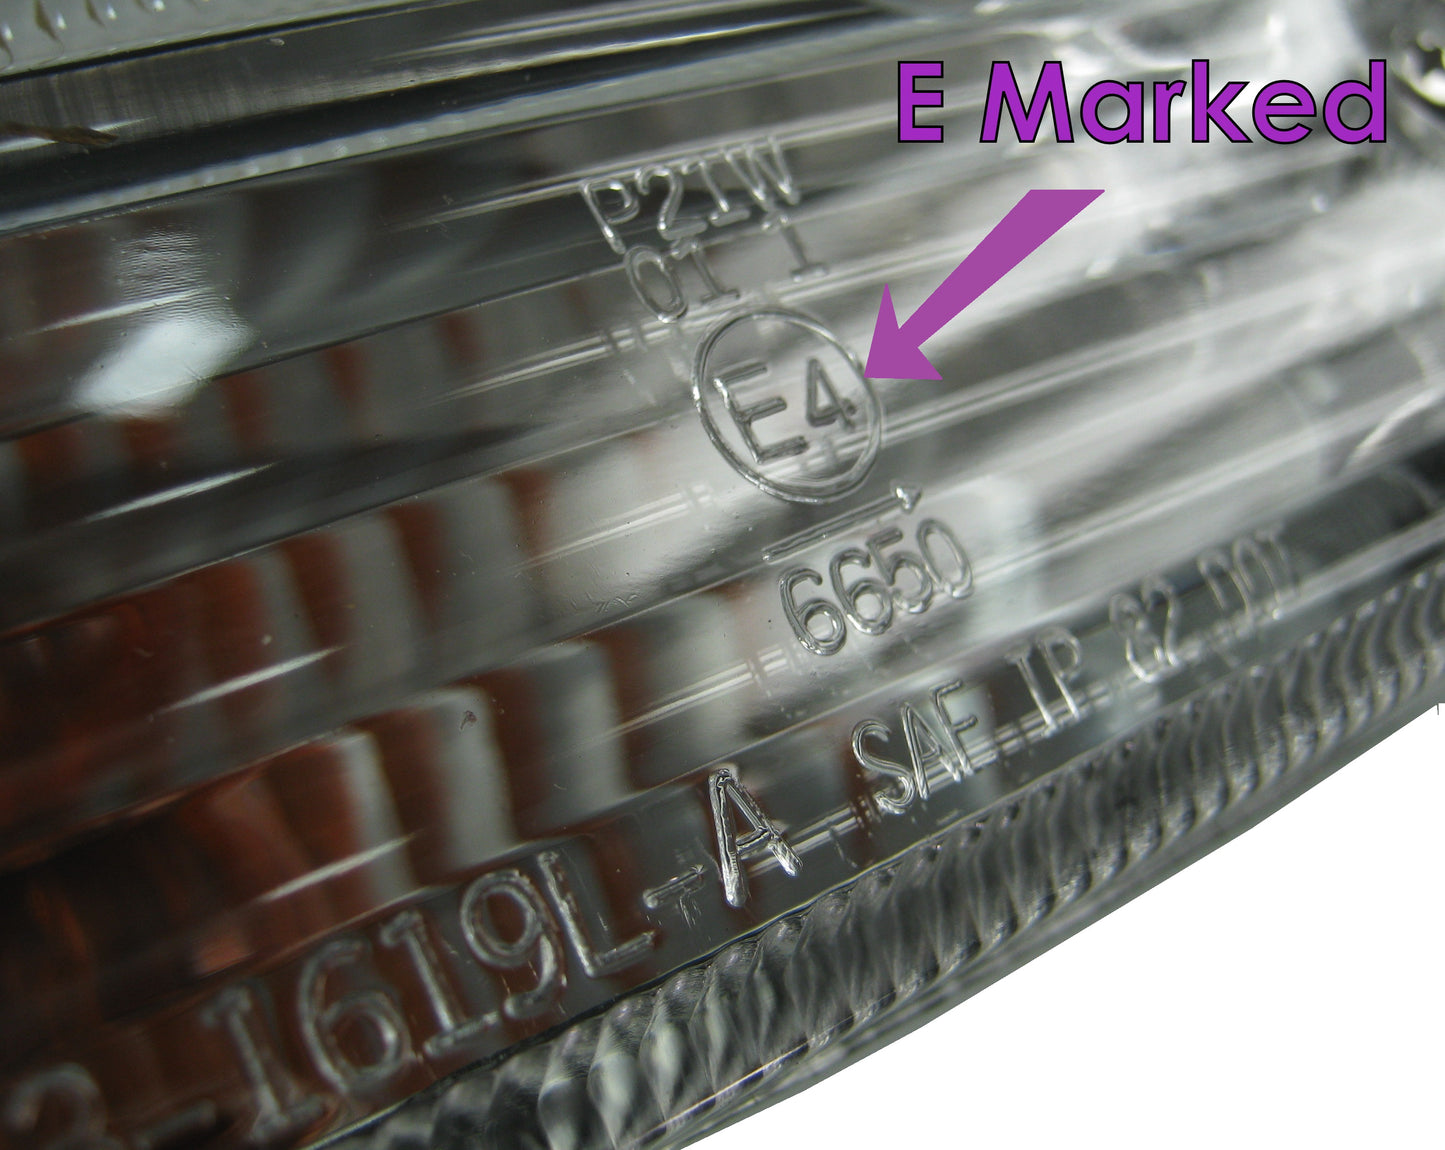 Isuzu TF Clear Front Indicator Light Assembly - E Marked - PAIR